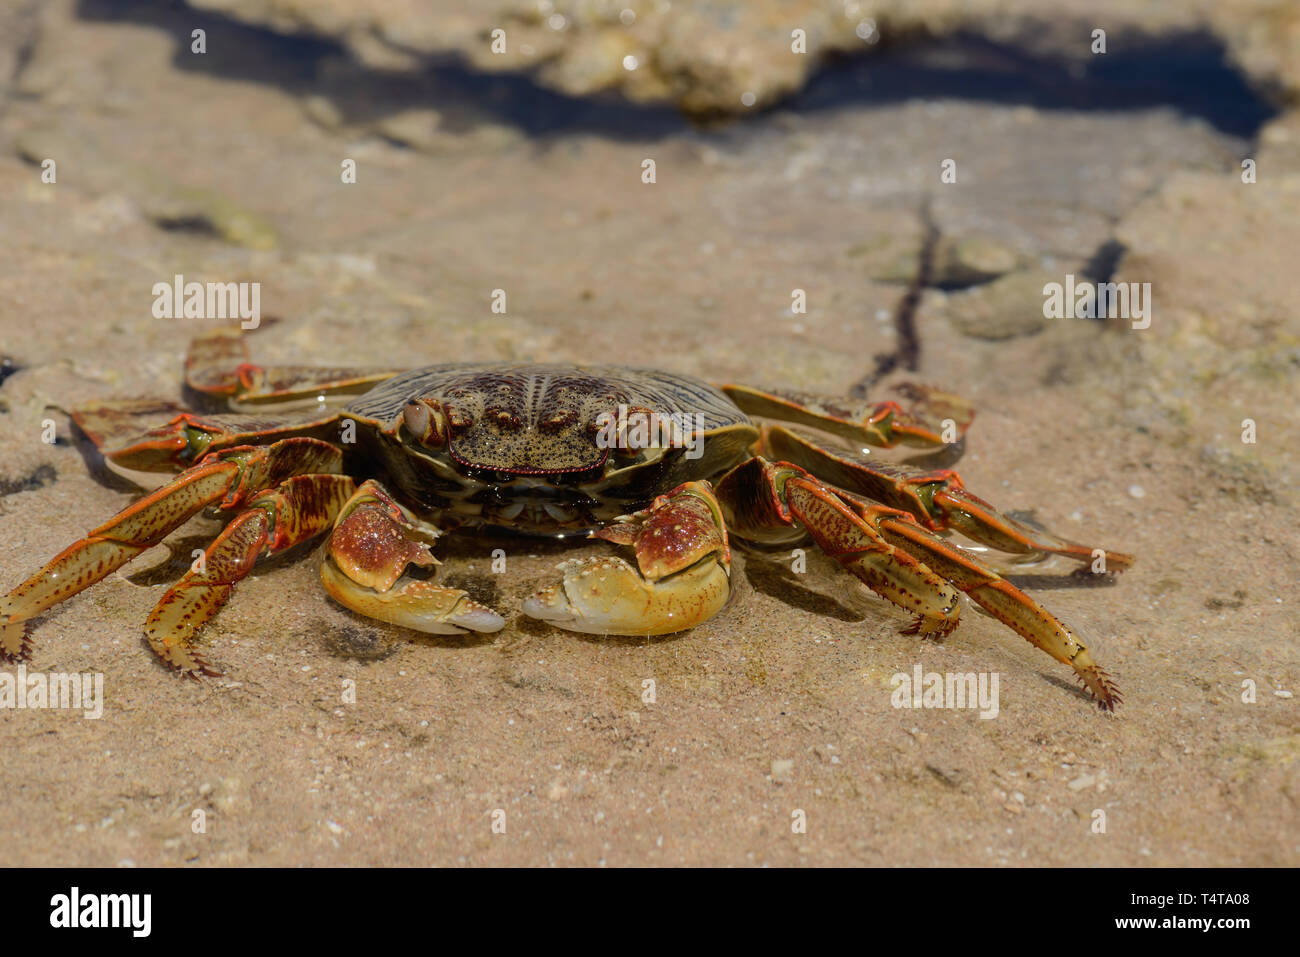 Red crab. Red sea. Egypt. close up. Top view. Stock Photo